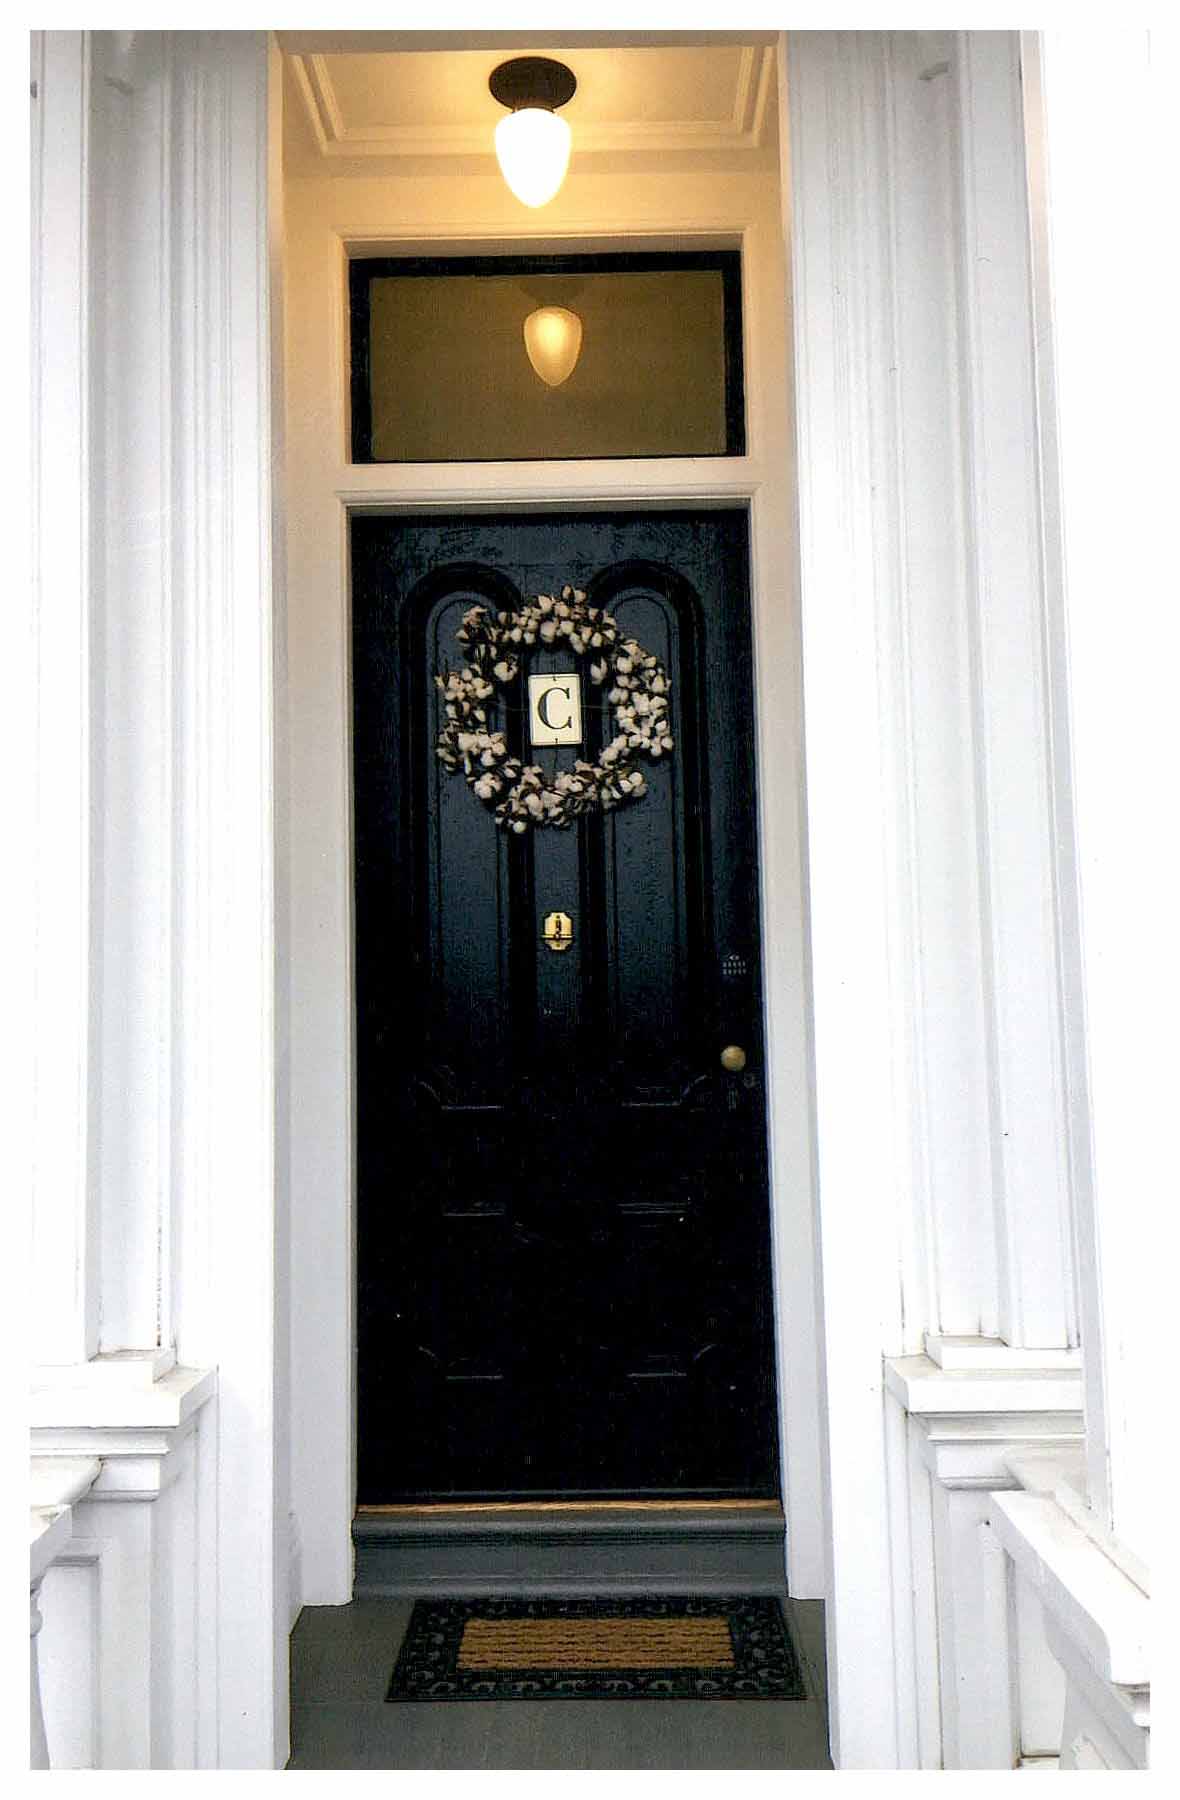 After: close-up view of restored front entrance with black painted paneled door and white flower wreath.